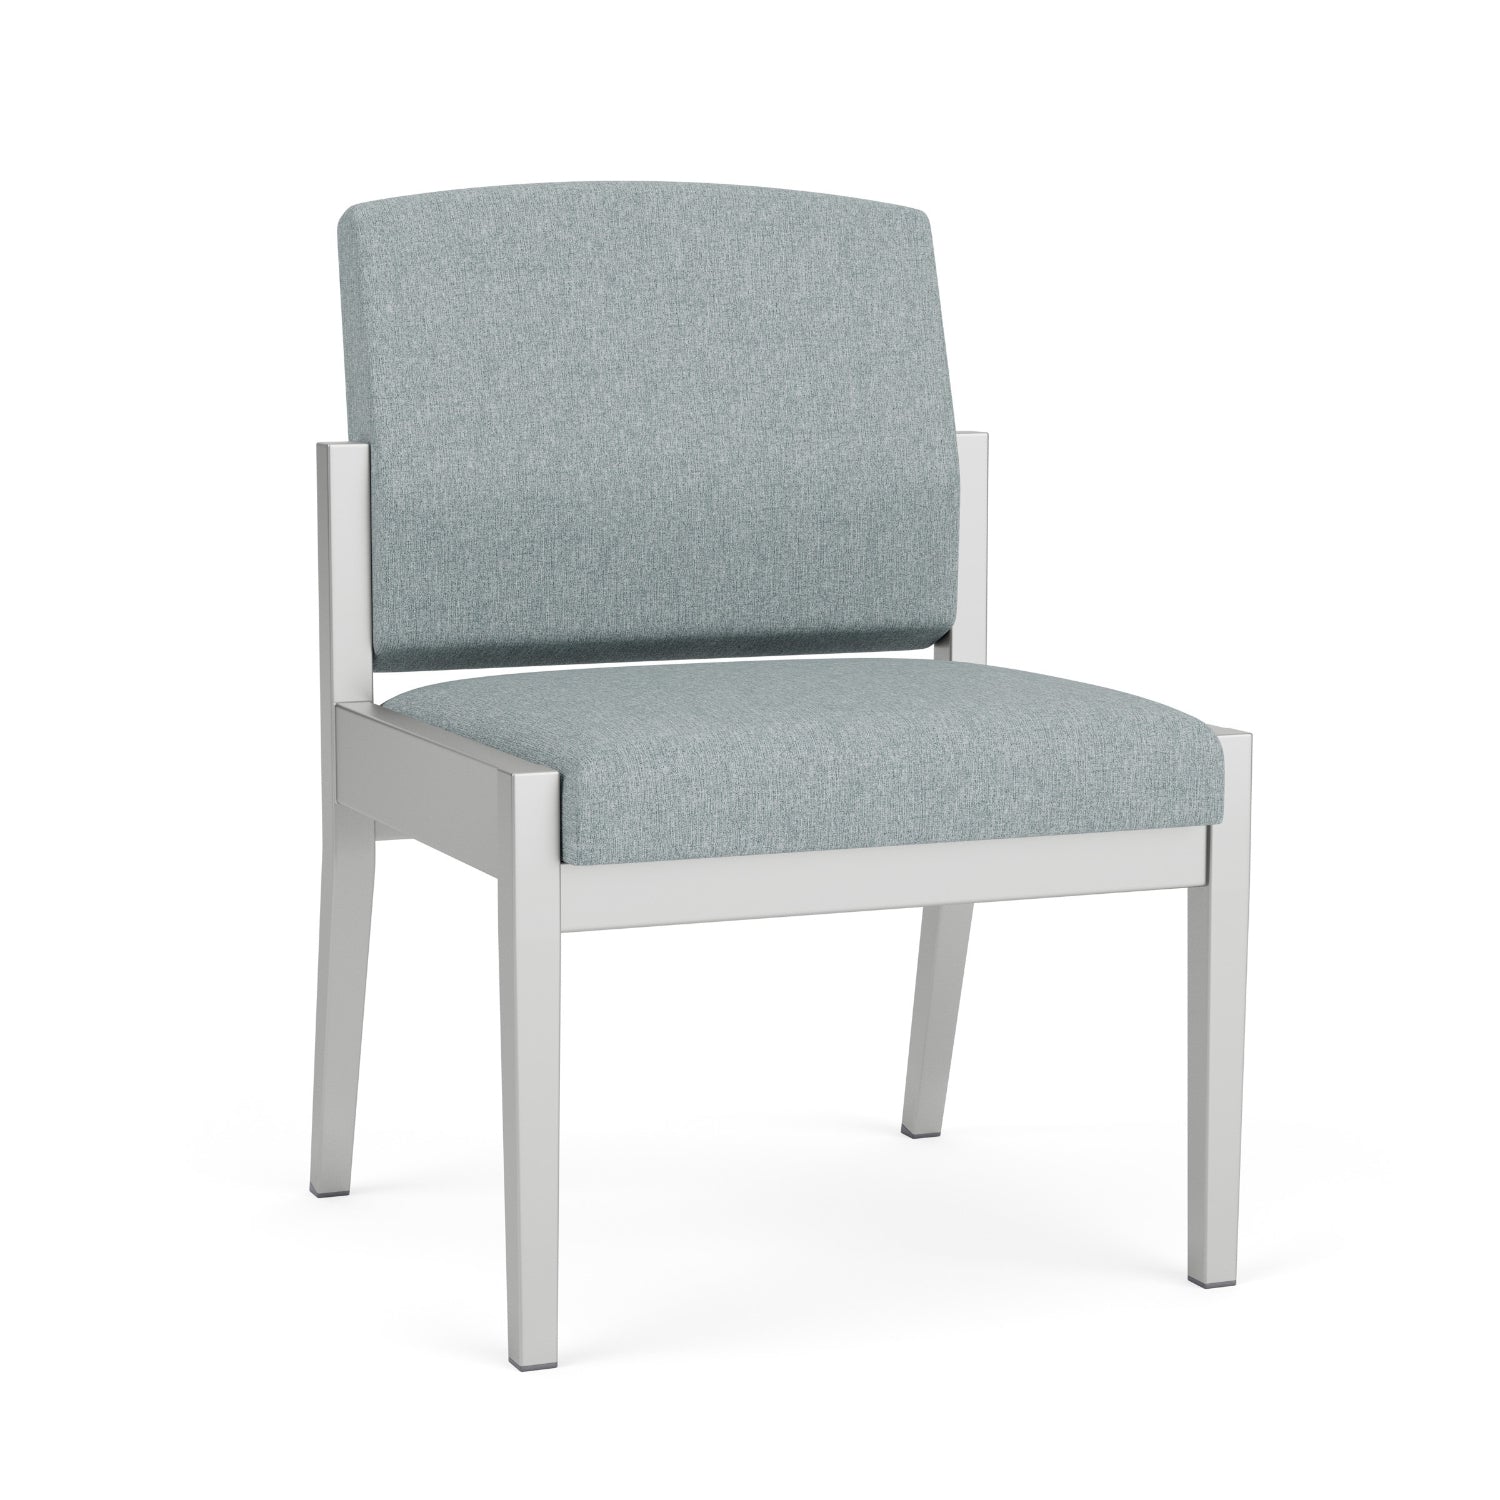 Amherst Steel Collection Reception Seating, Armless Guest Chair, Healthcare Vinyl Upholstery, FREE SHIPPING